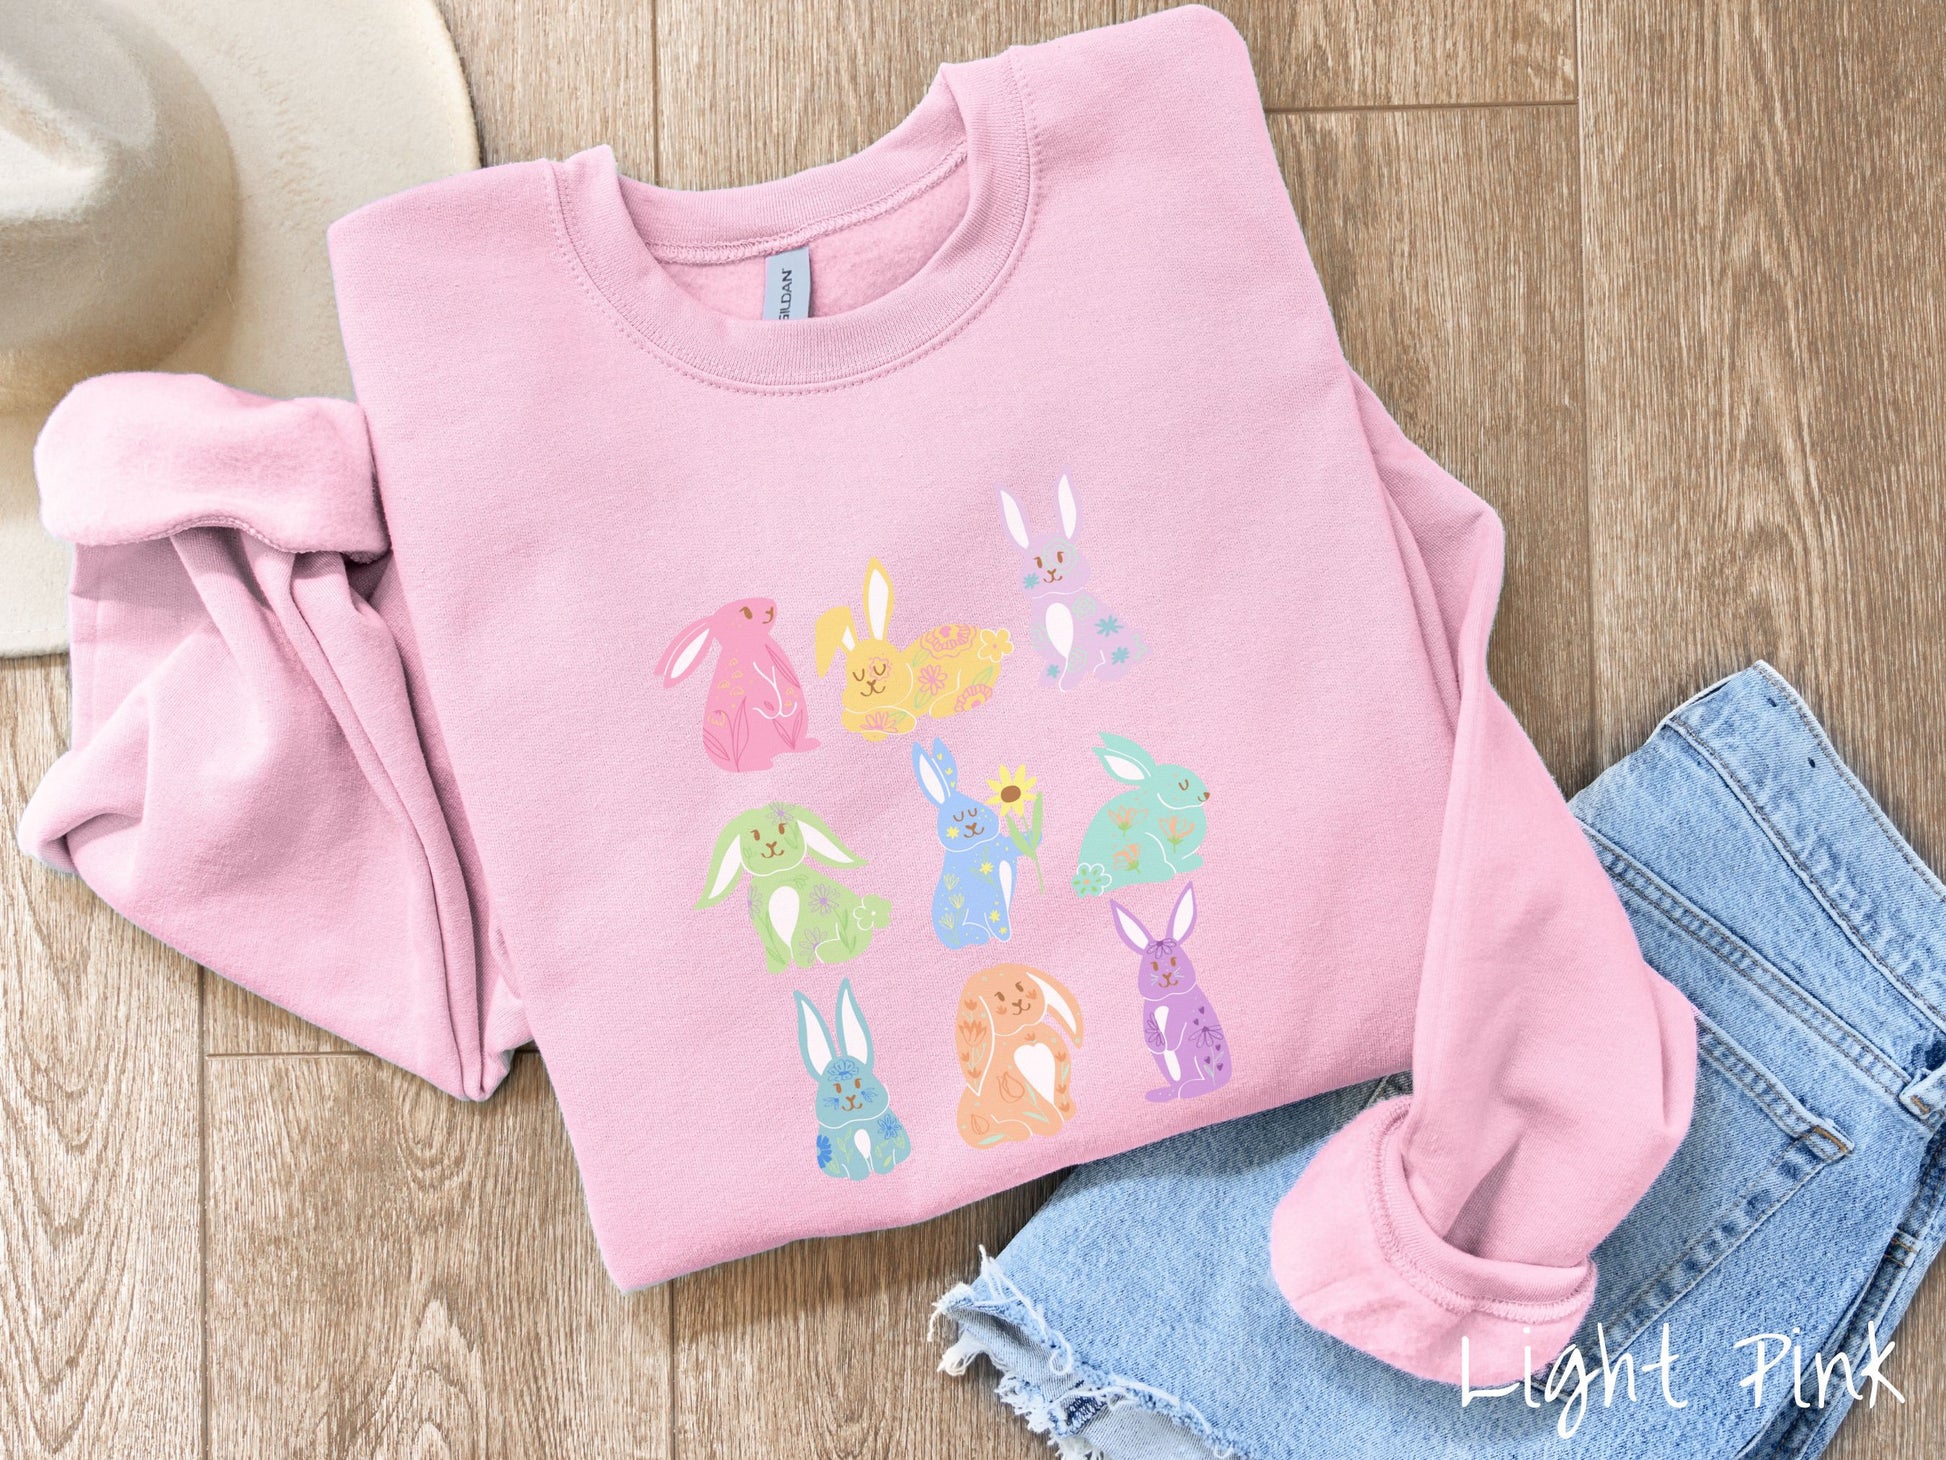 A cute, vintage light pink colored sweatshirt with a three by three grid of colorful bunny rabbits. They are from left to right pink, yellow, purple, green, blue, seafoam, light blue, orange, and purple with flowers near them.